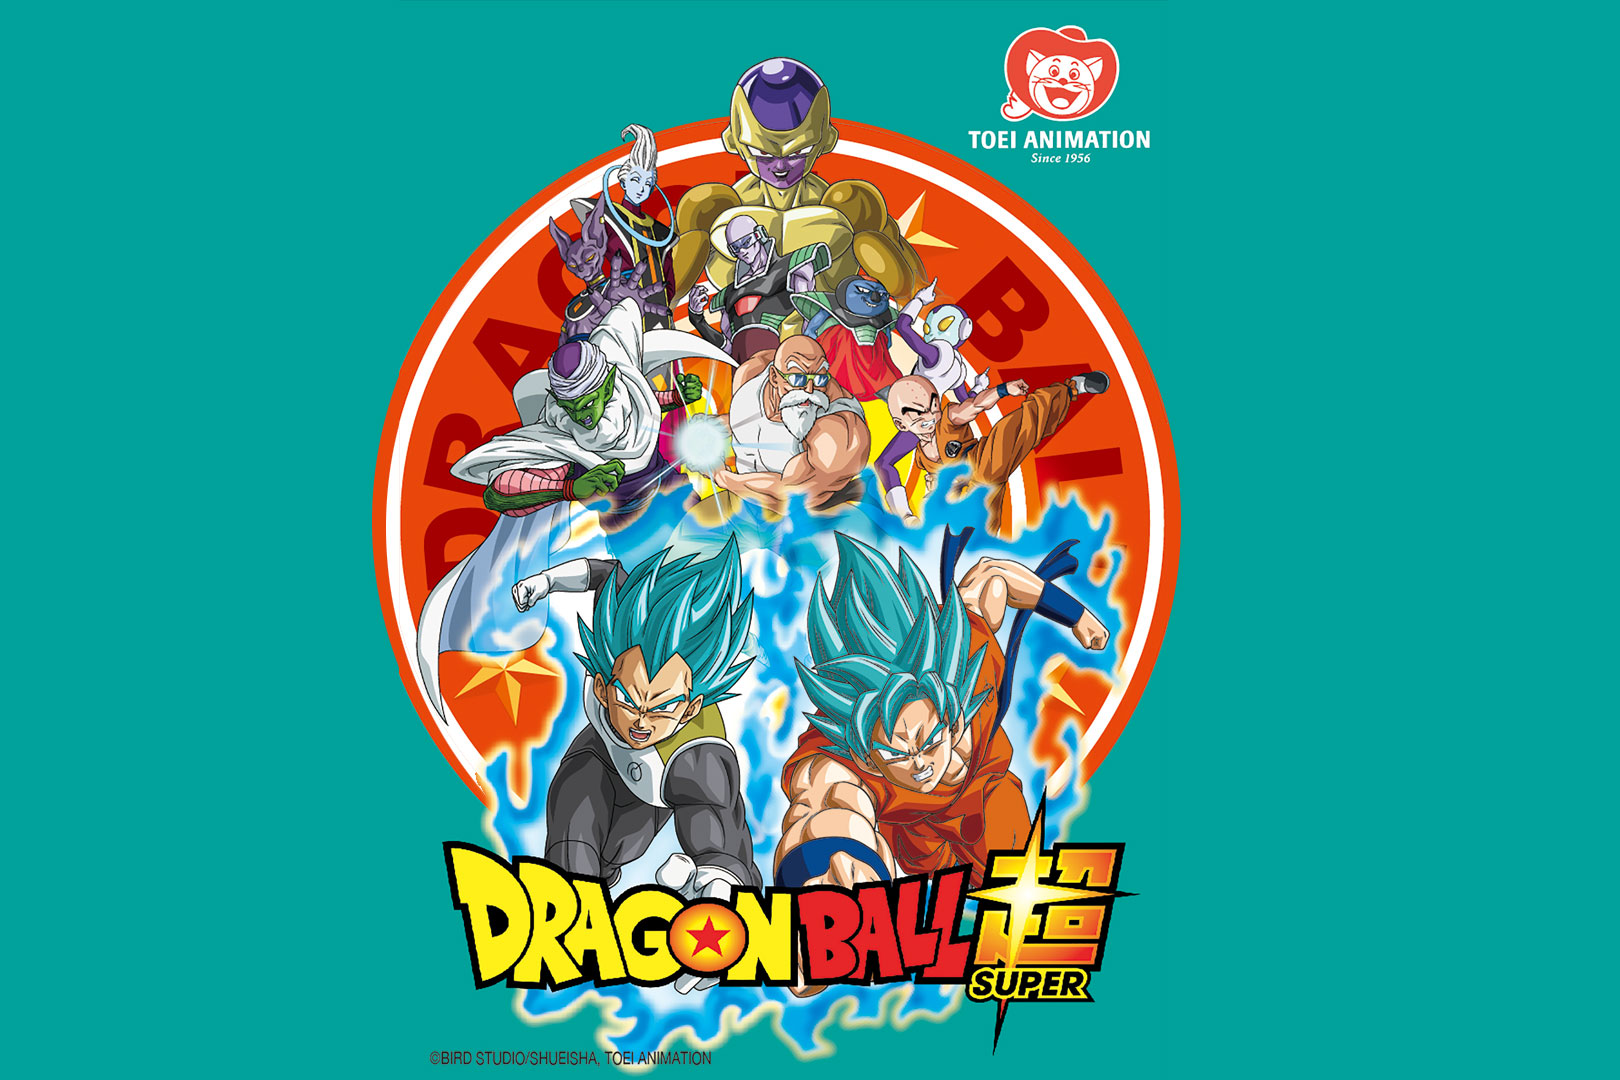 SIMULCAST ANNOUNCEMENT: DRAGON BALL SUPER WITH ENGLISH SUBTITLES COMING TO MULIPLE DIGITAL PLATFORMS ON 10/22/2016 AT 6:00PM